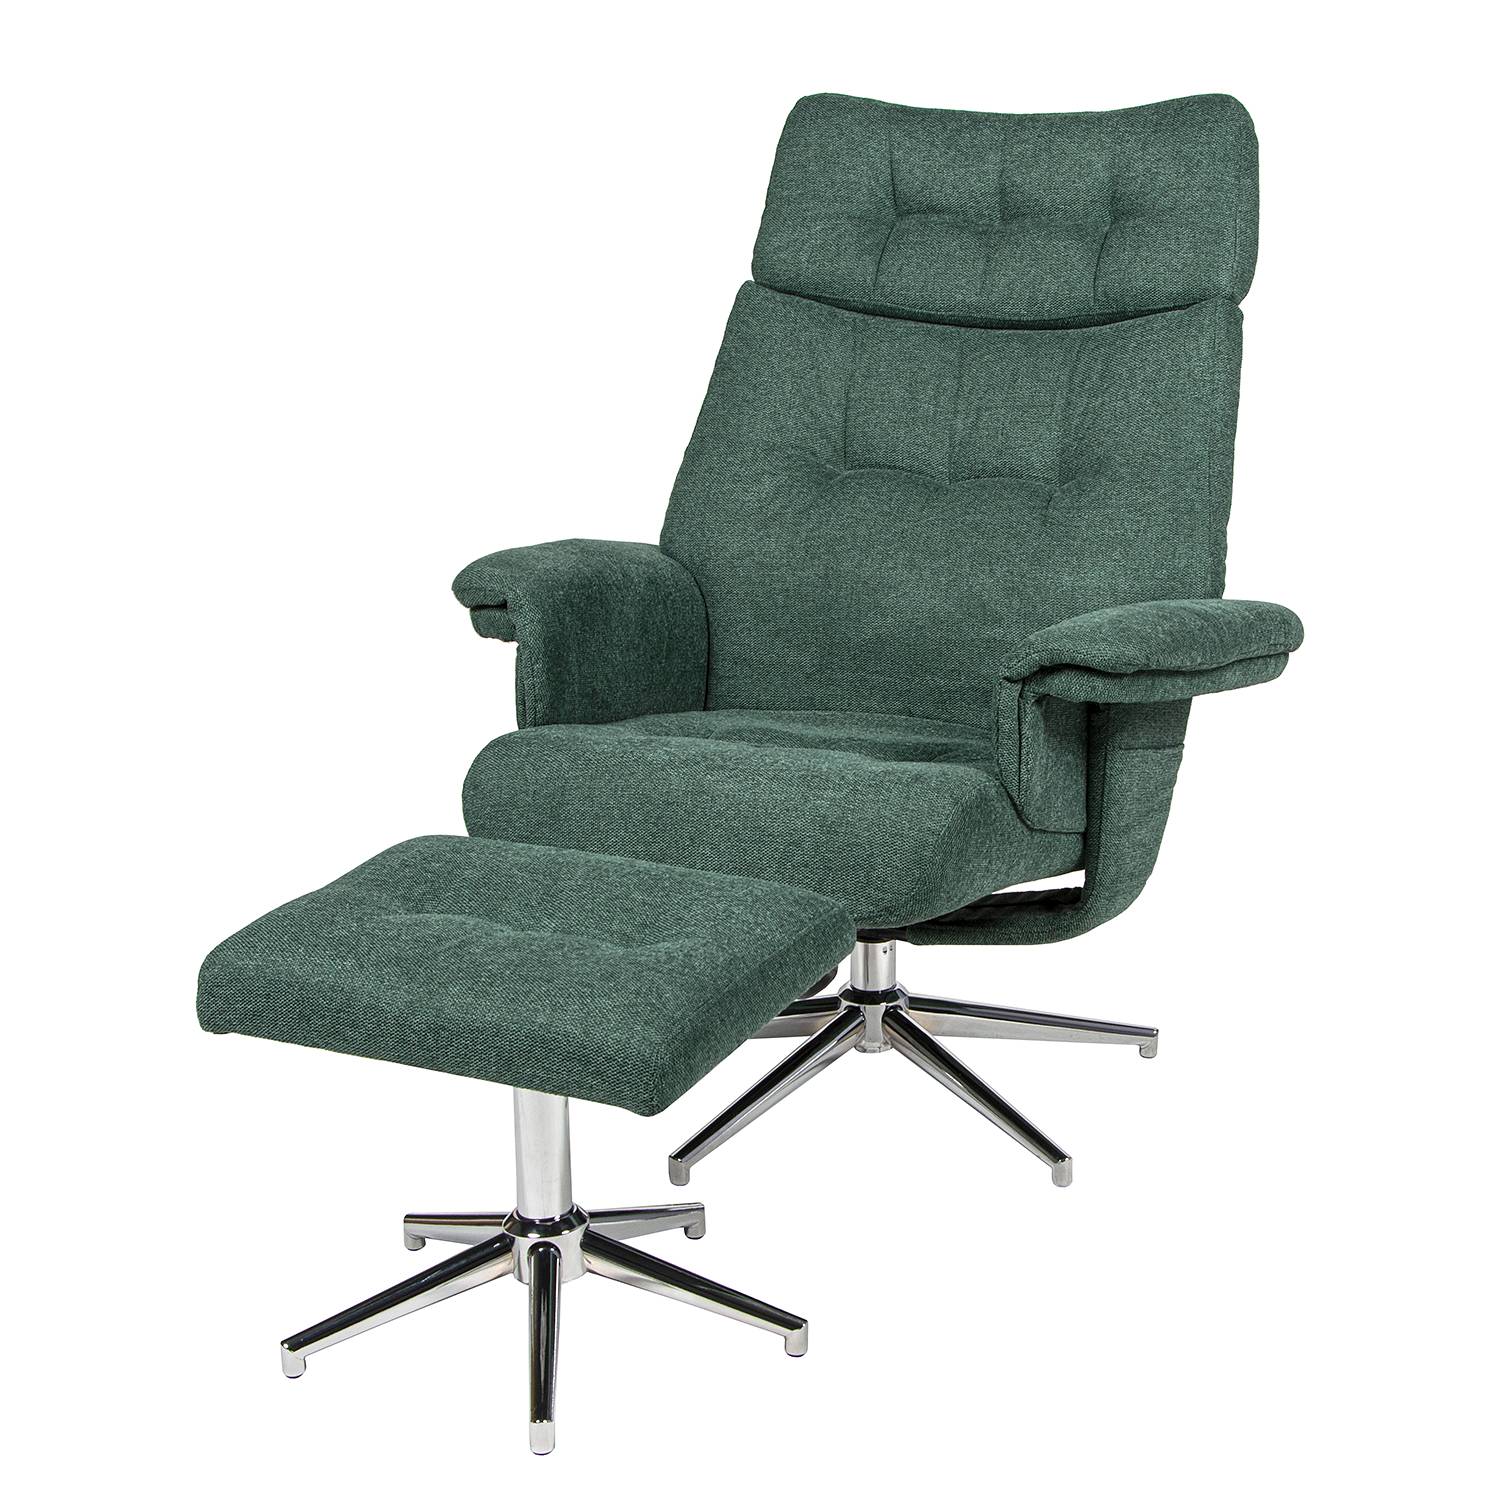 Image of Fauteuil relax Peers 000000001000216319